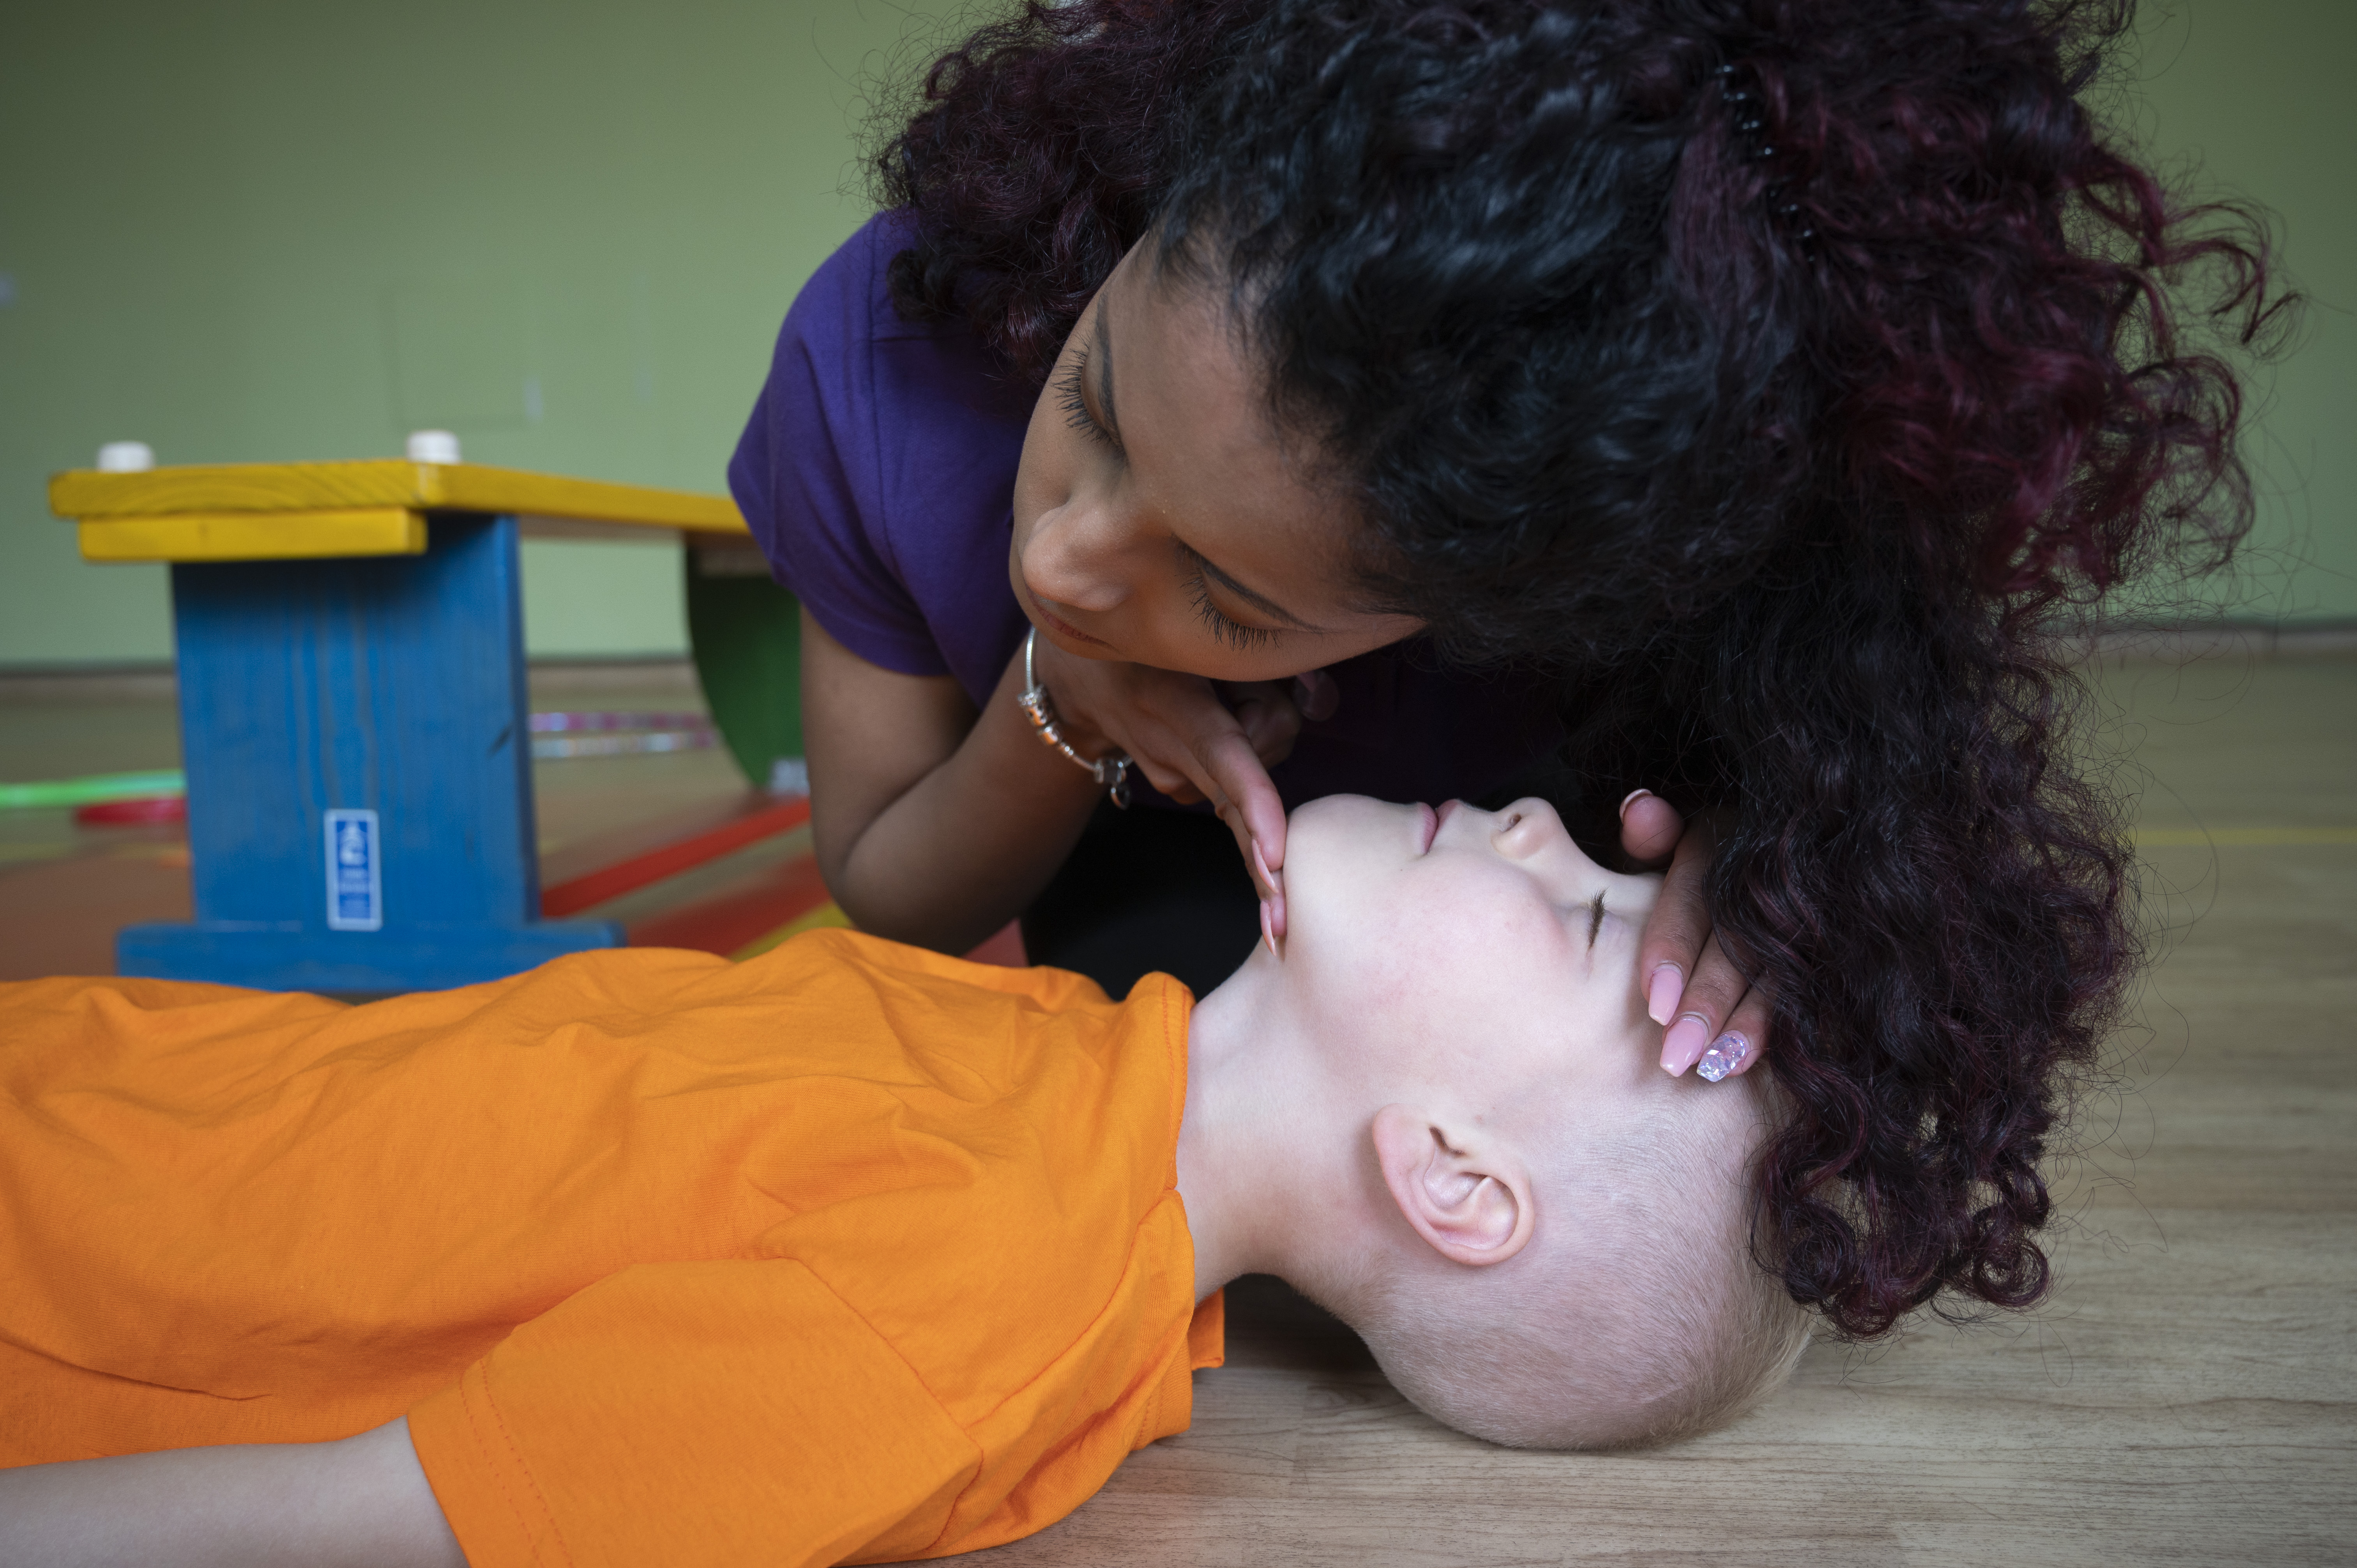 Woman checking if child lying on floor is breathing by looking, feeling and listening for breaths